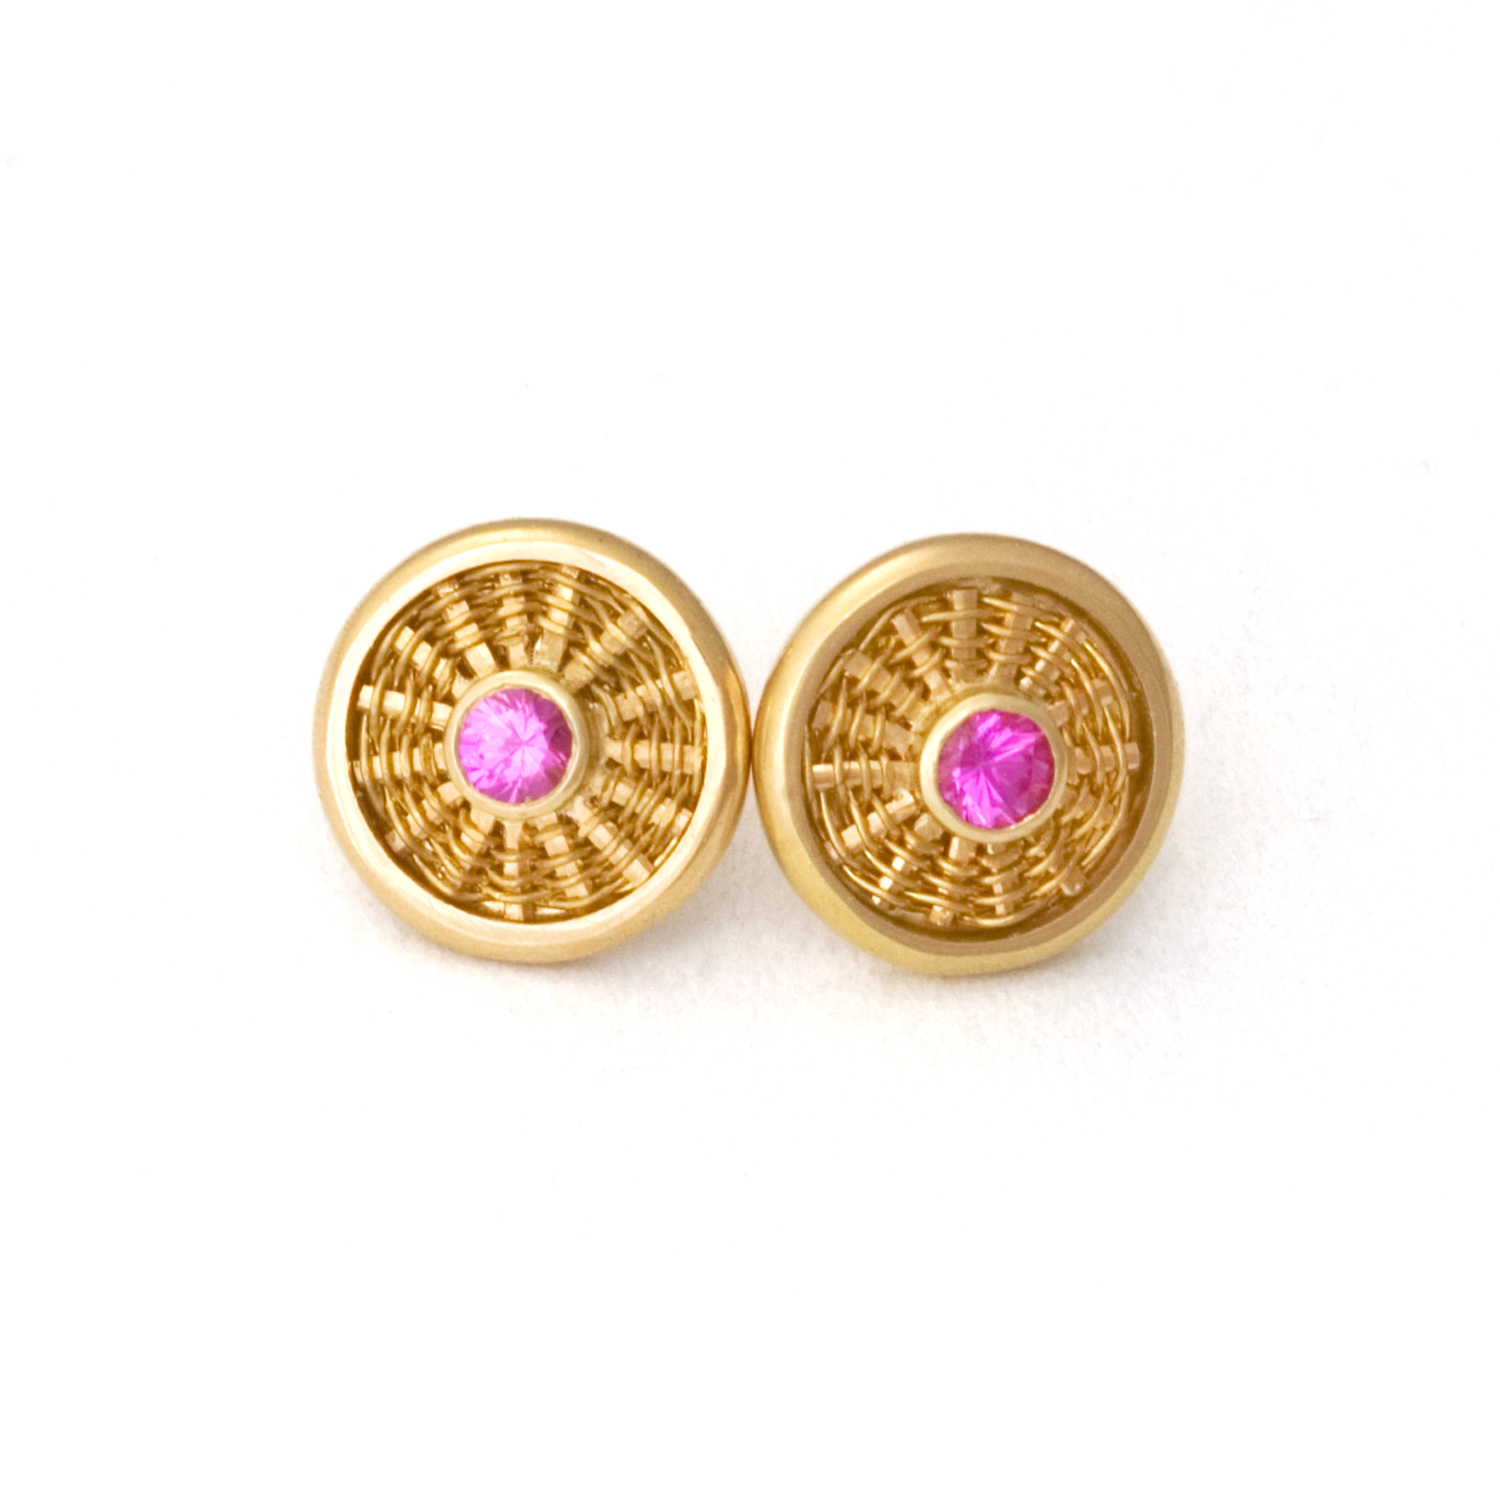 Sunburst Weave Stud Earrings in 18k & 22k gold with pink sapphires by Tamberlaine